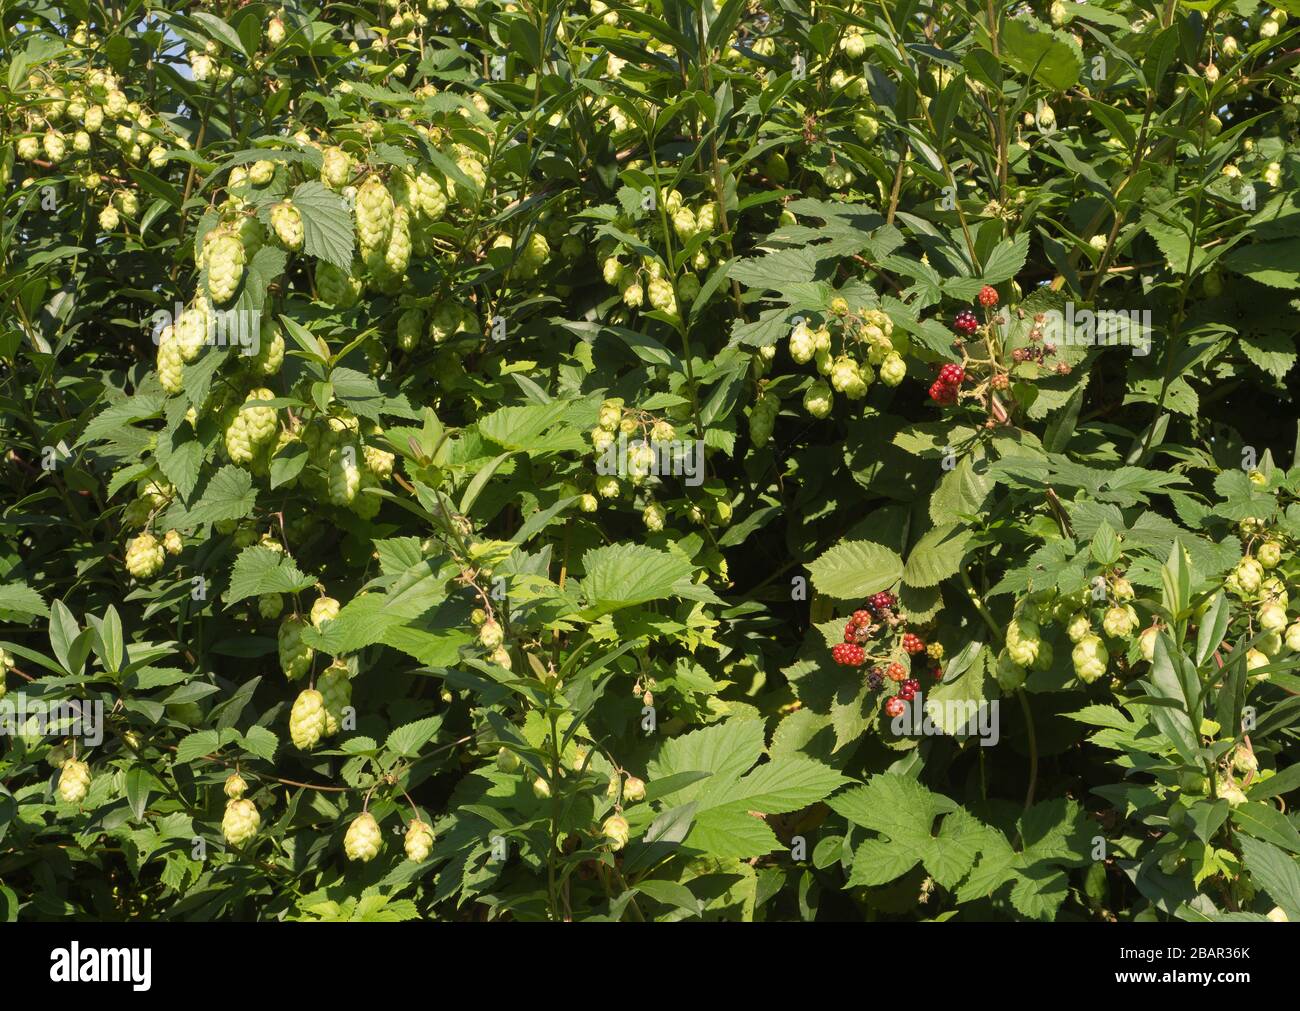 Dense vegetation of hops and bramble bushes along a footpath in Lübeck Germany Stock Photo